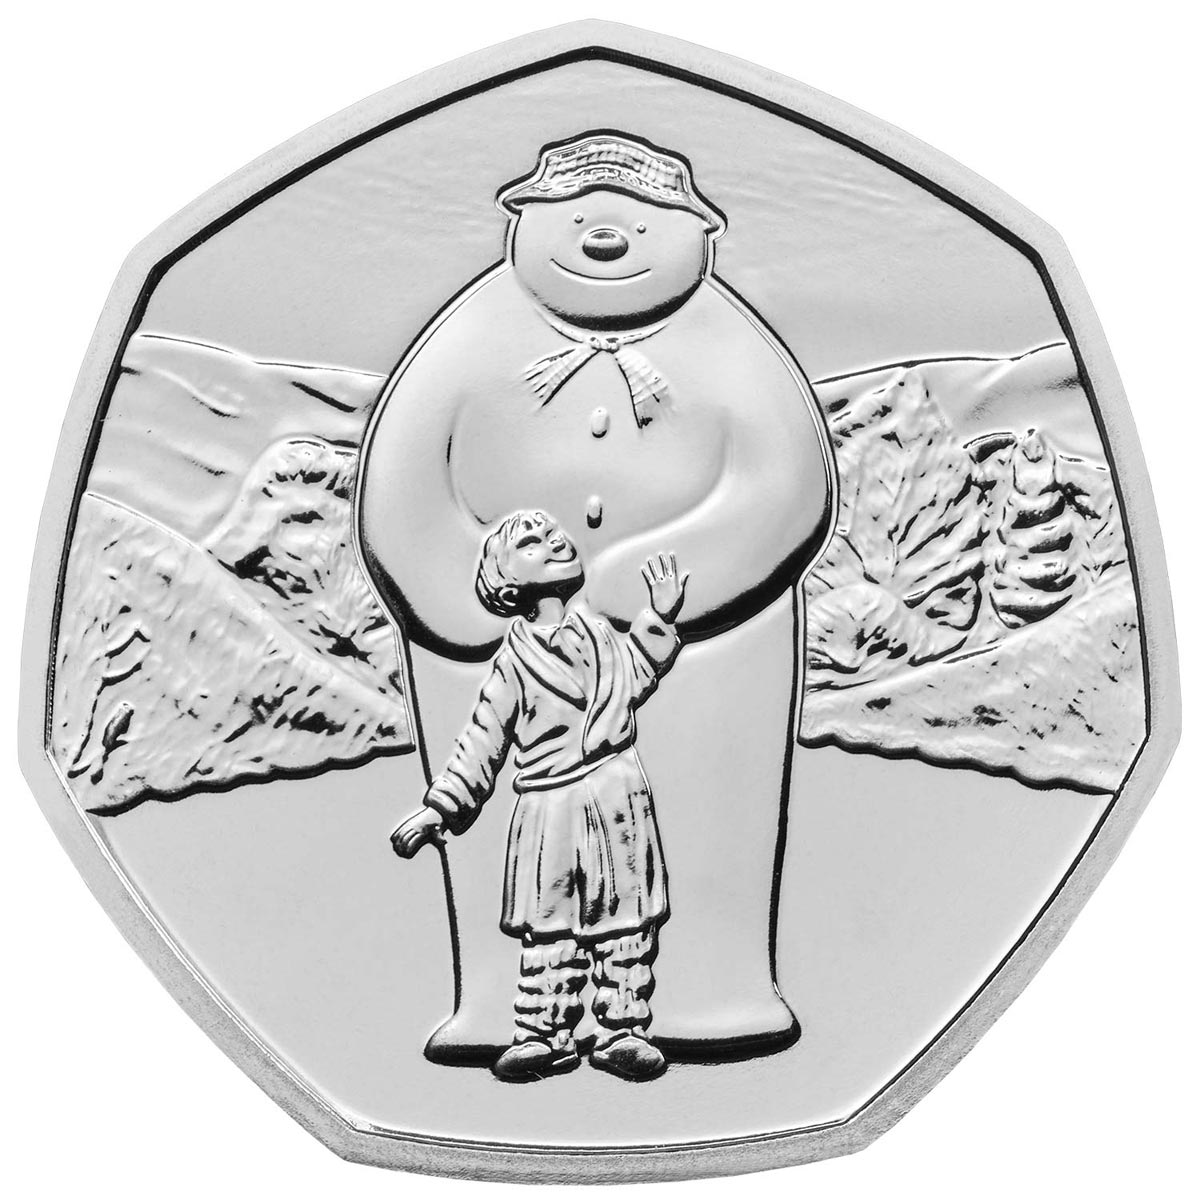 Image of 50 pence coin - The Snowman | United Kingdom 2019.  The Copper–Nickel (CuNi) coin is of Proof, BU quality.